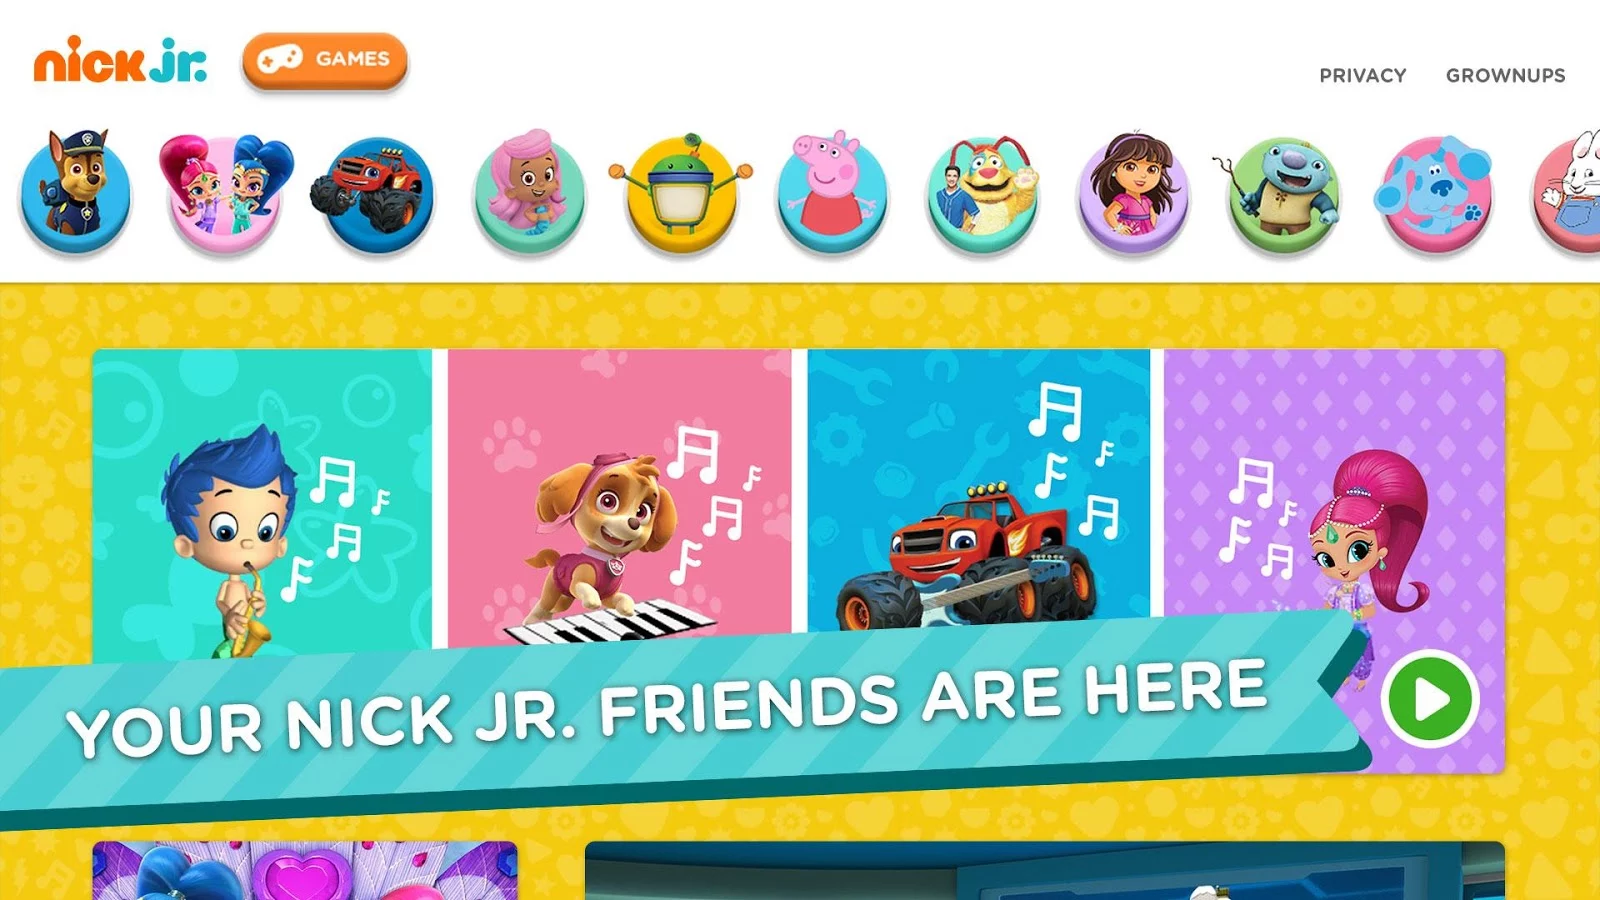 Nick Jr - Watch Kids TV Shows::Appstore for Android